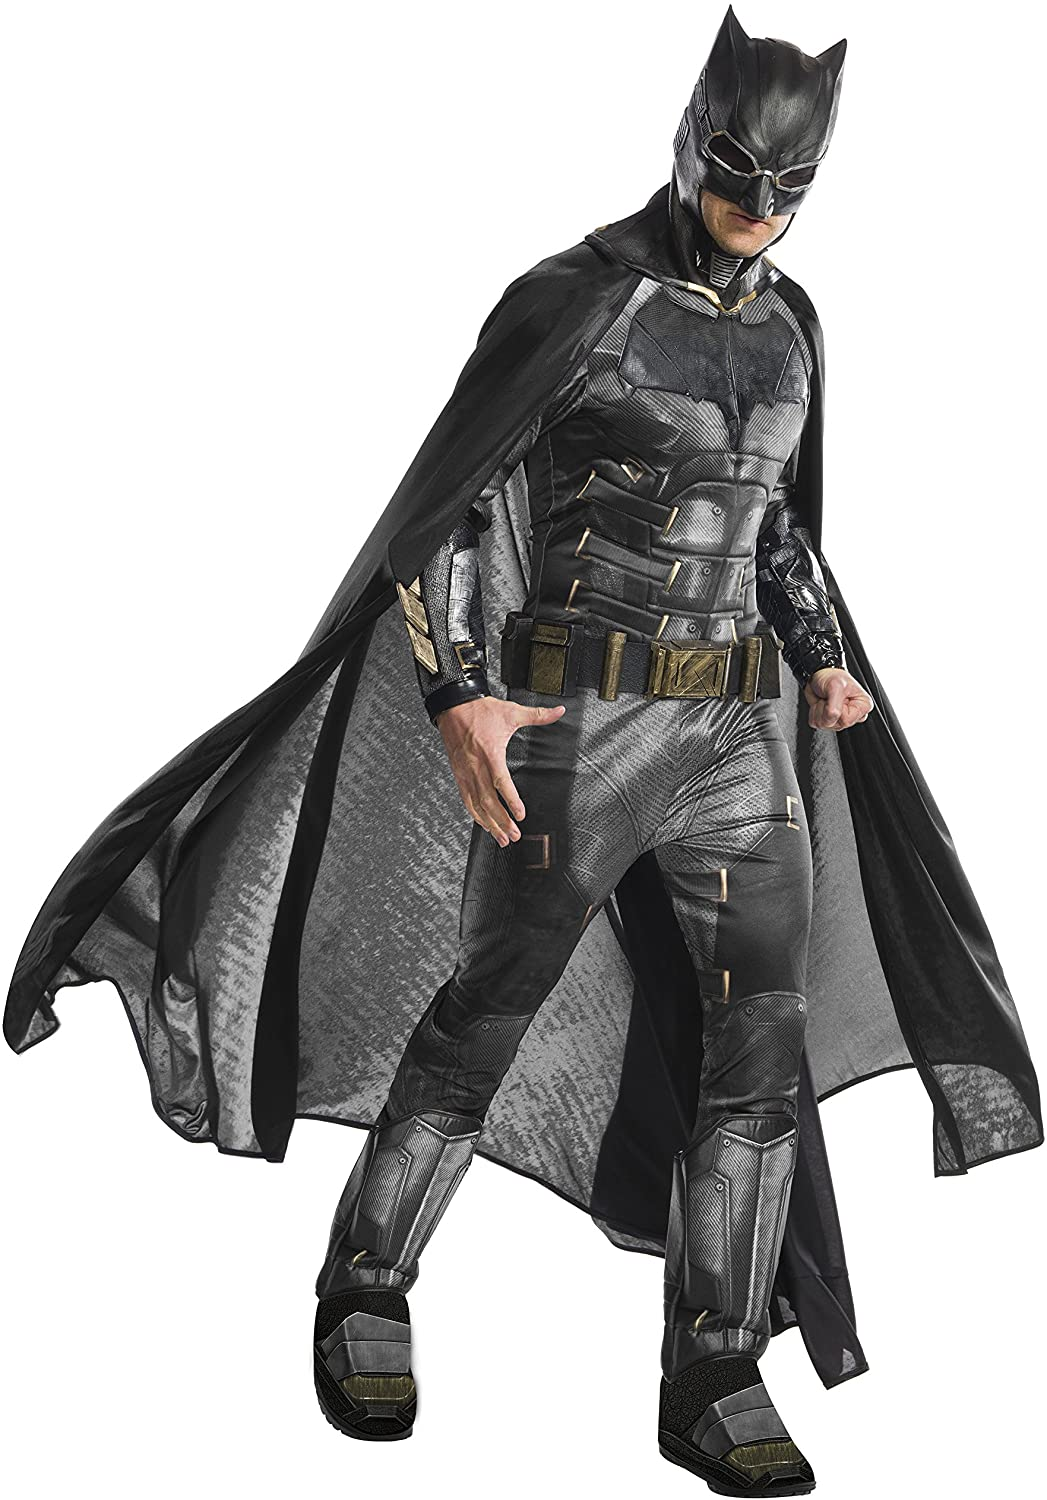 Batman Costume from Justice League Movie